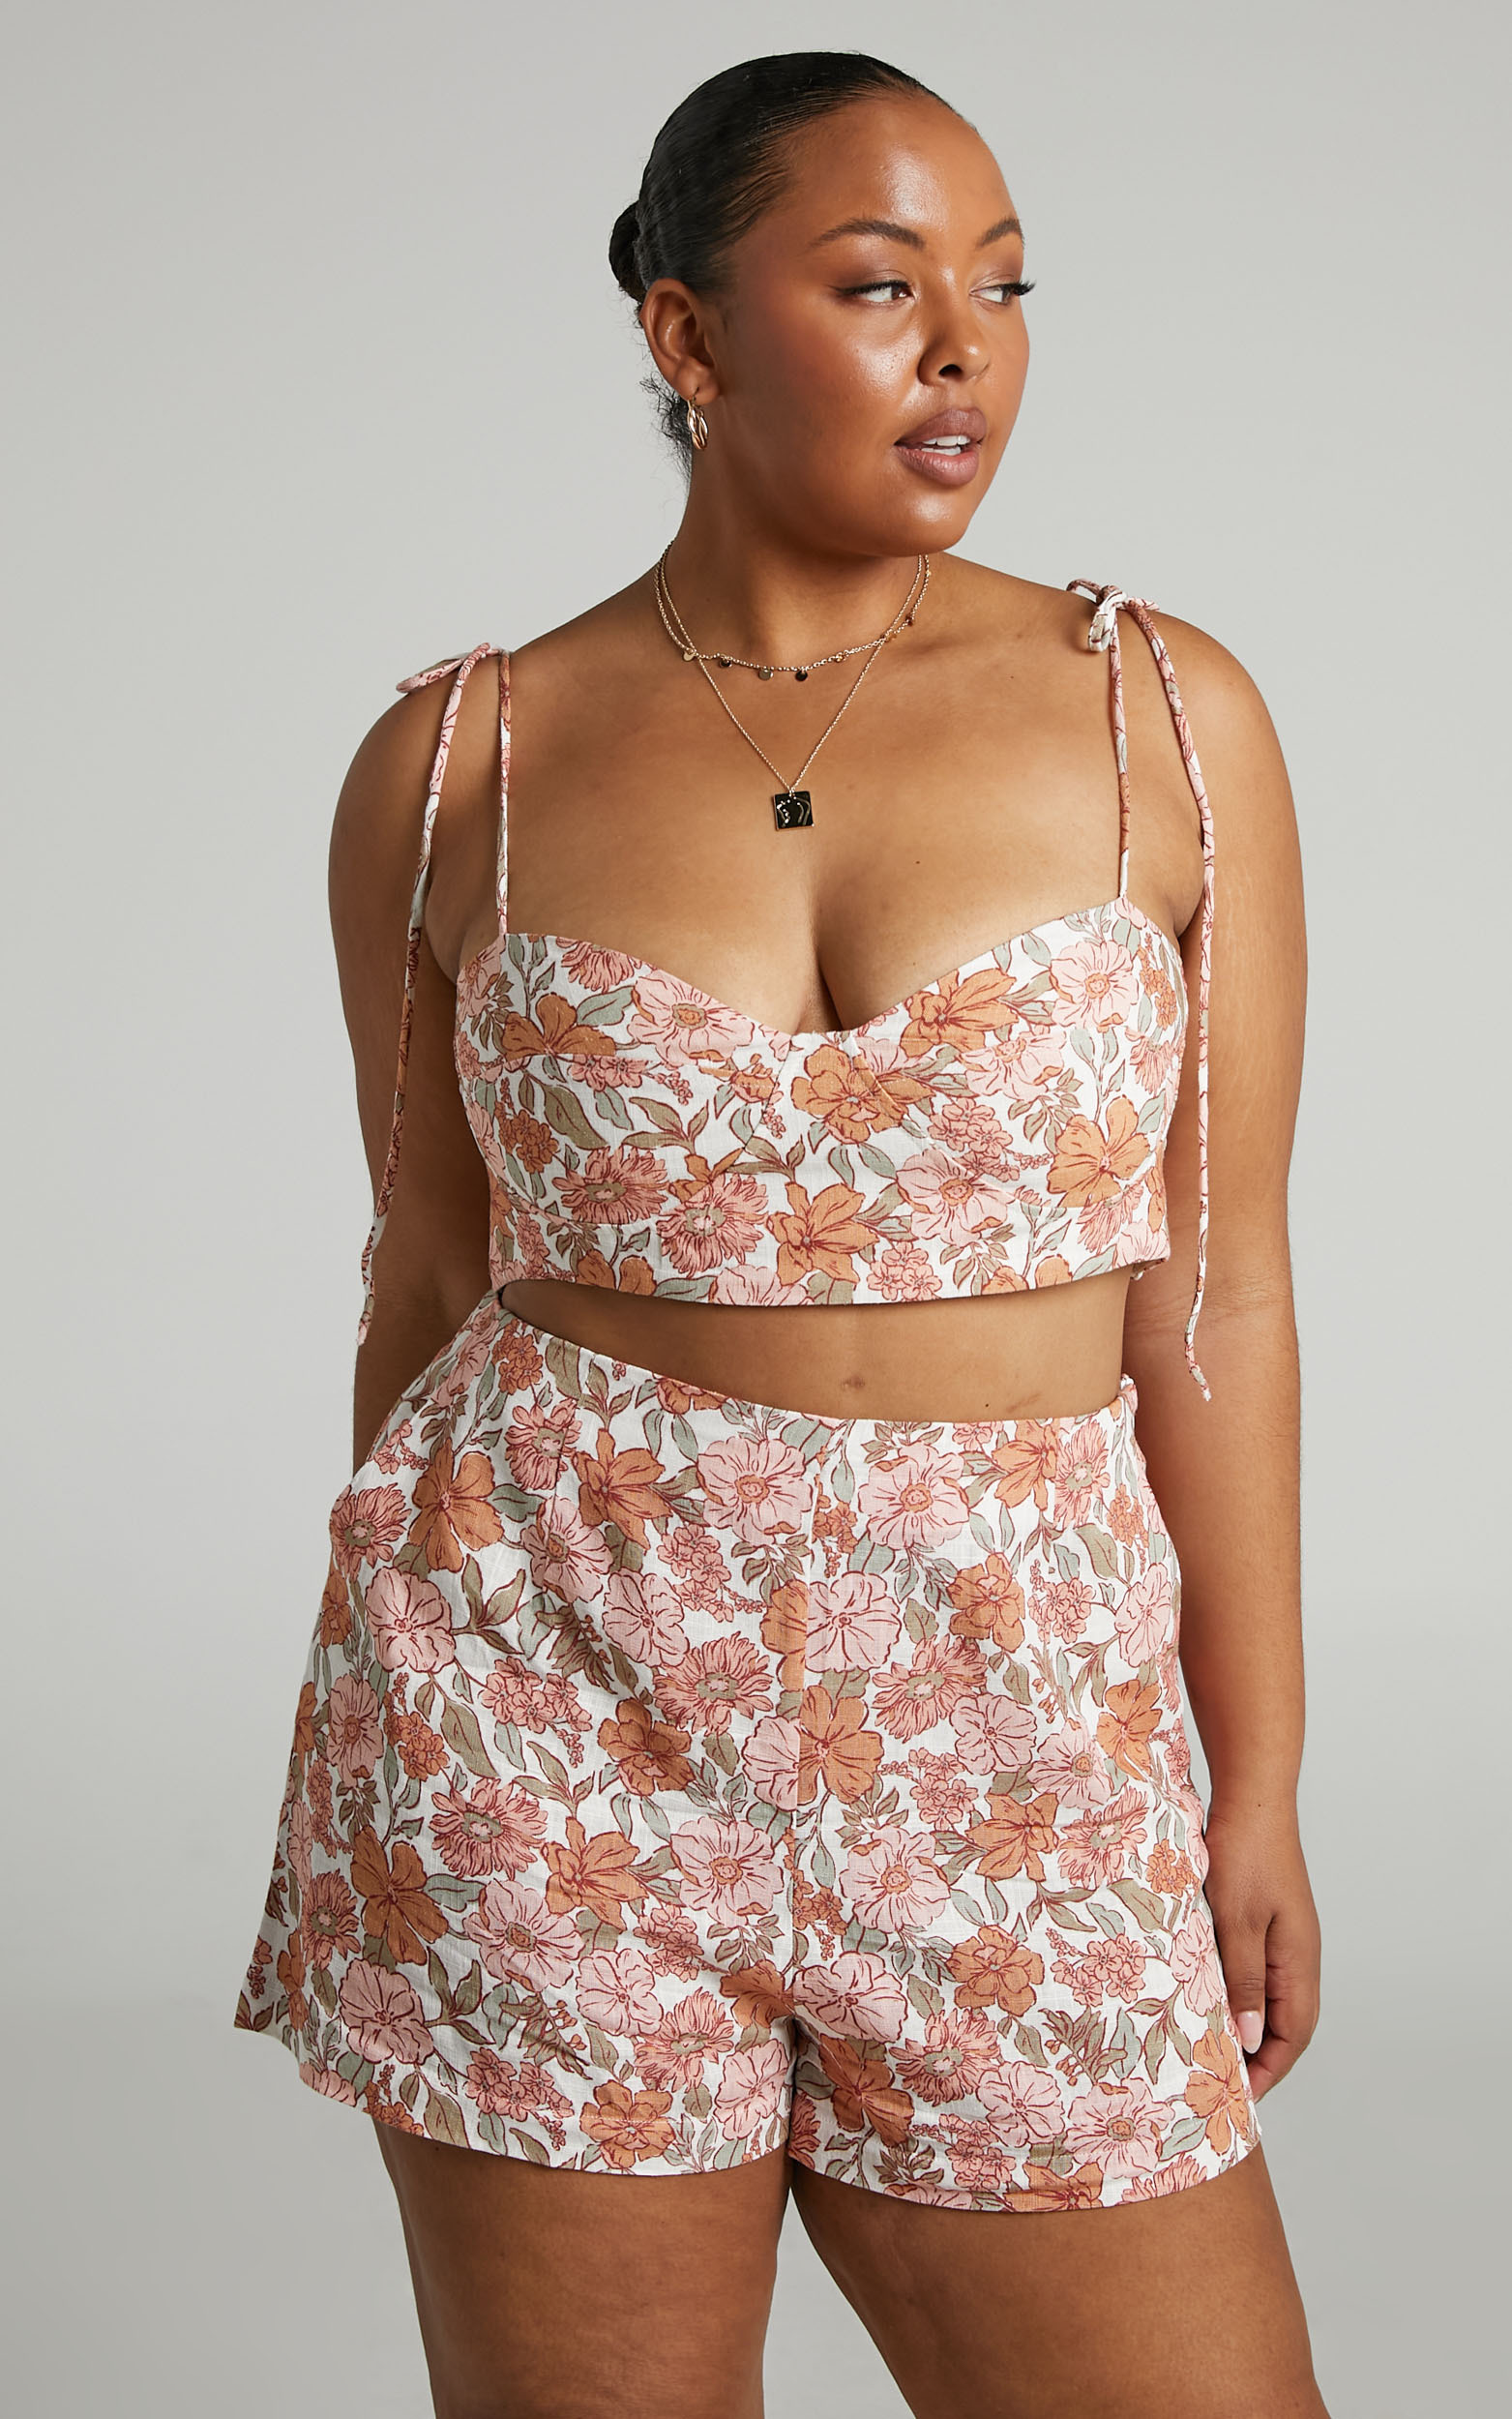 Amalie The Label - Lorete High Waisted Shorts in Wildflower Floral - 04, WHT1, hi-res image number null